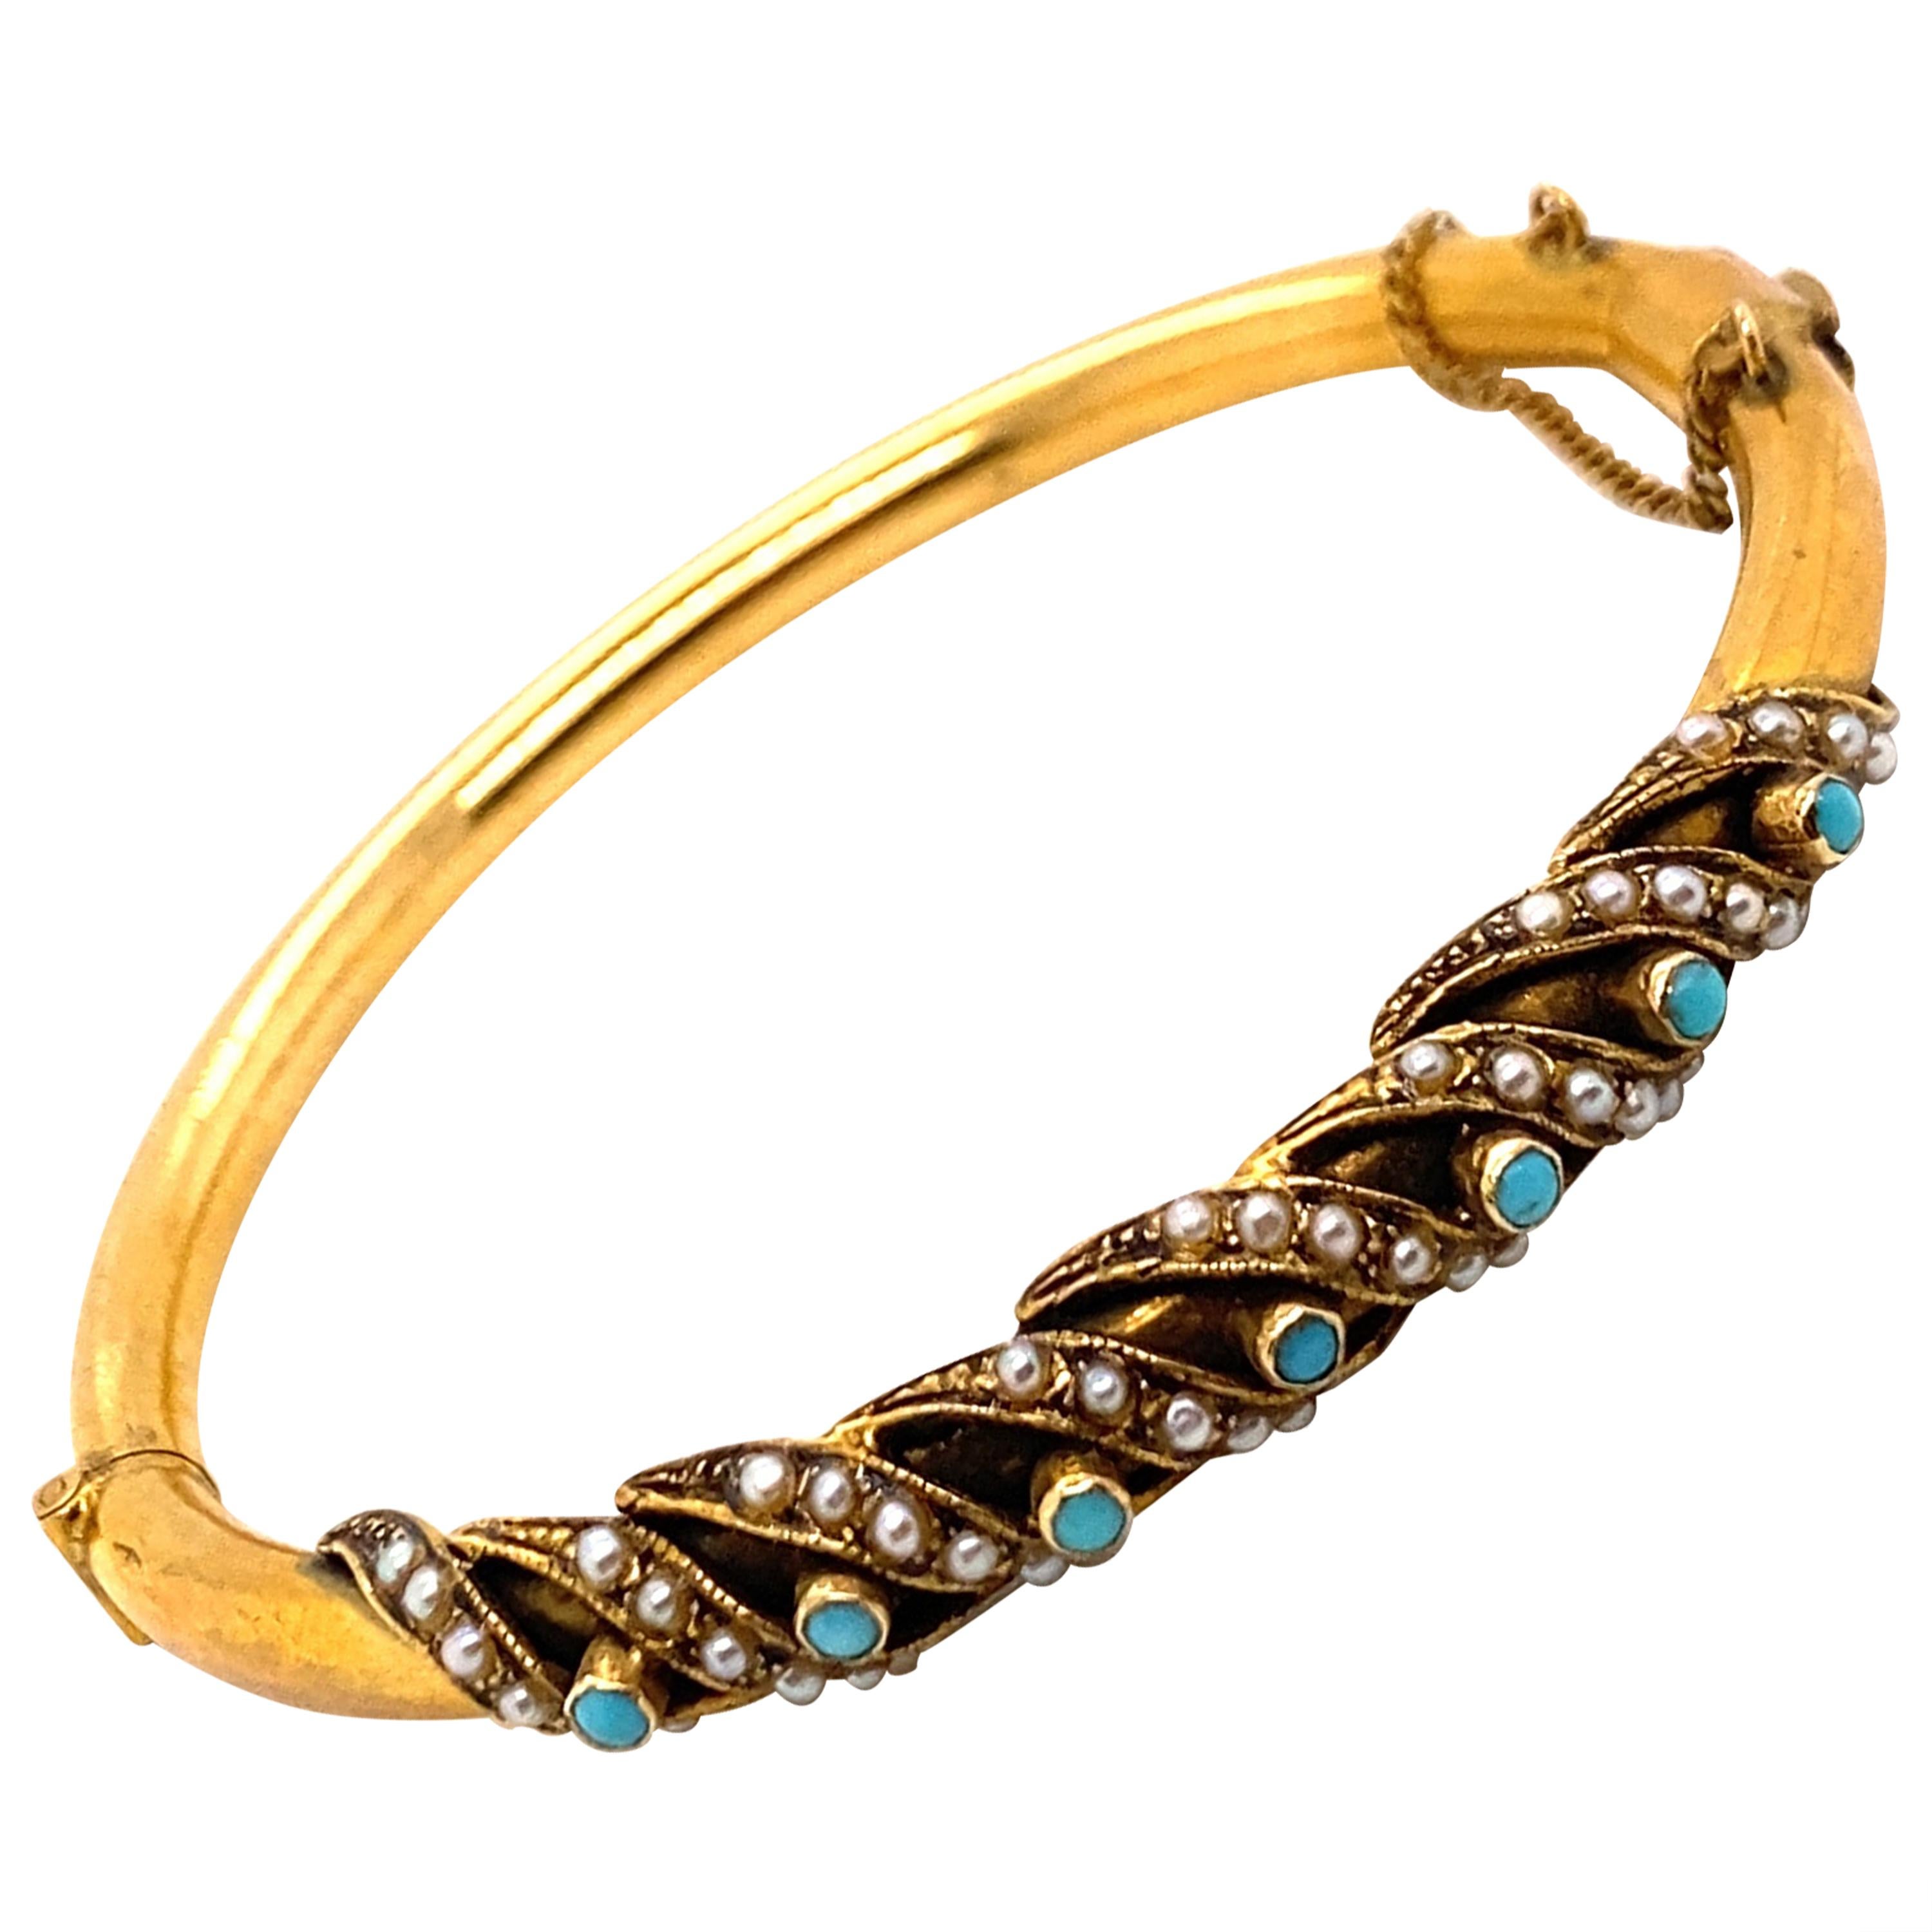 Details about   Edwardian 14K Turquoise and Seed Pearl Bangle #7277/NCC 